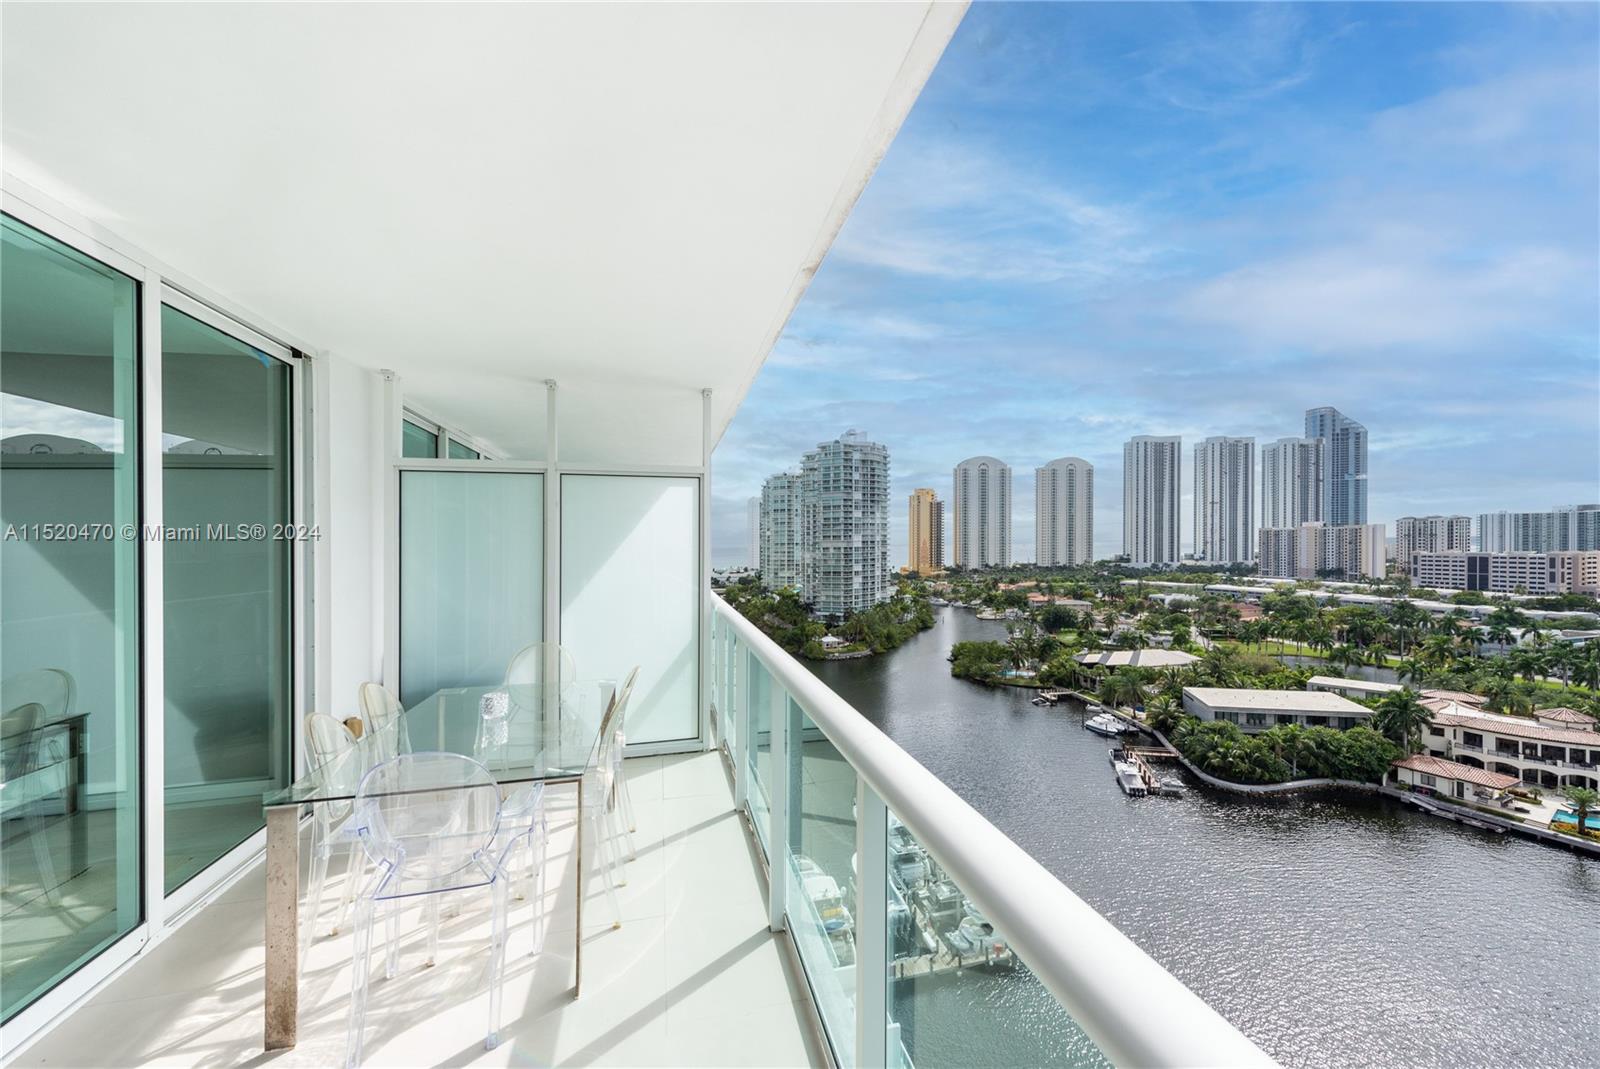 Beautiful completely furnished unit with unobstructed panoramic intracoastal water views from every room. High end property of 3 bed/2.5 baths offering all the utilities & comfort to you. Full of natural light, unit is professionally designed & finished with Porcelain floor. Building is located in less than 5 miles to Bal Barbour & Aventura Mall. Minimum 4 months lease. Listing Price is for annual rent. Price will change depending on the length of the stay and season. Please contact listing agent for the price.